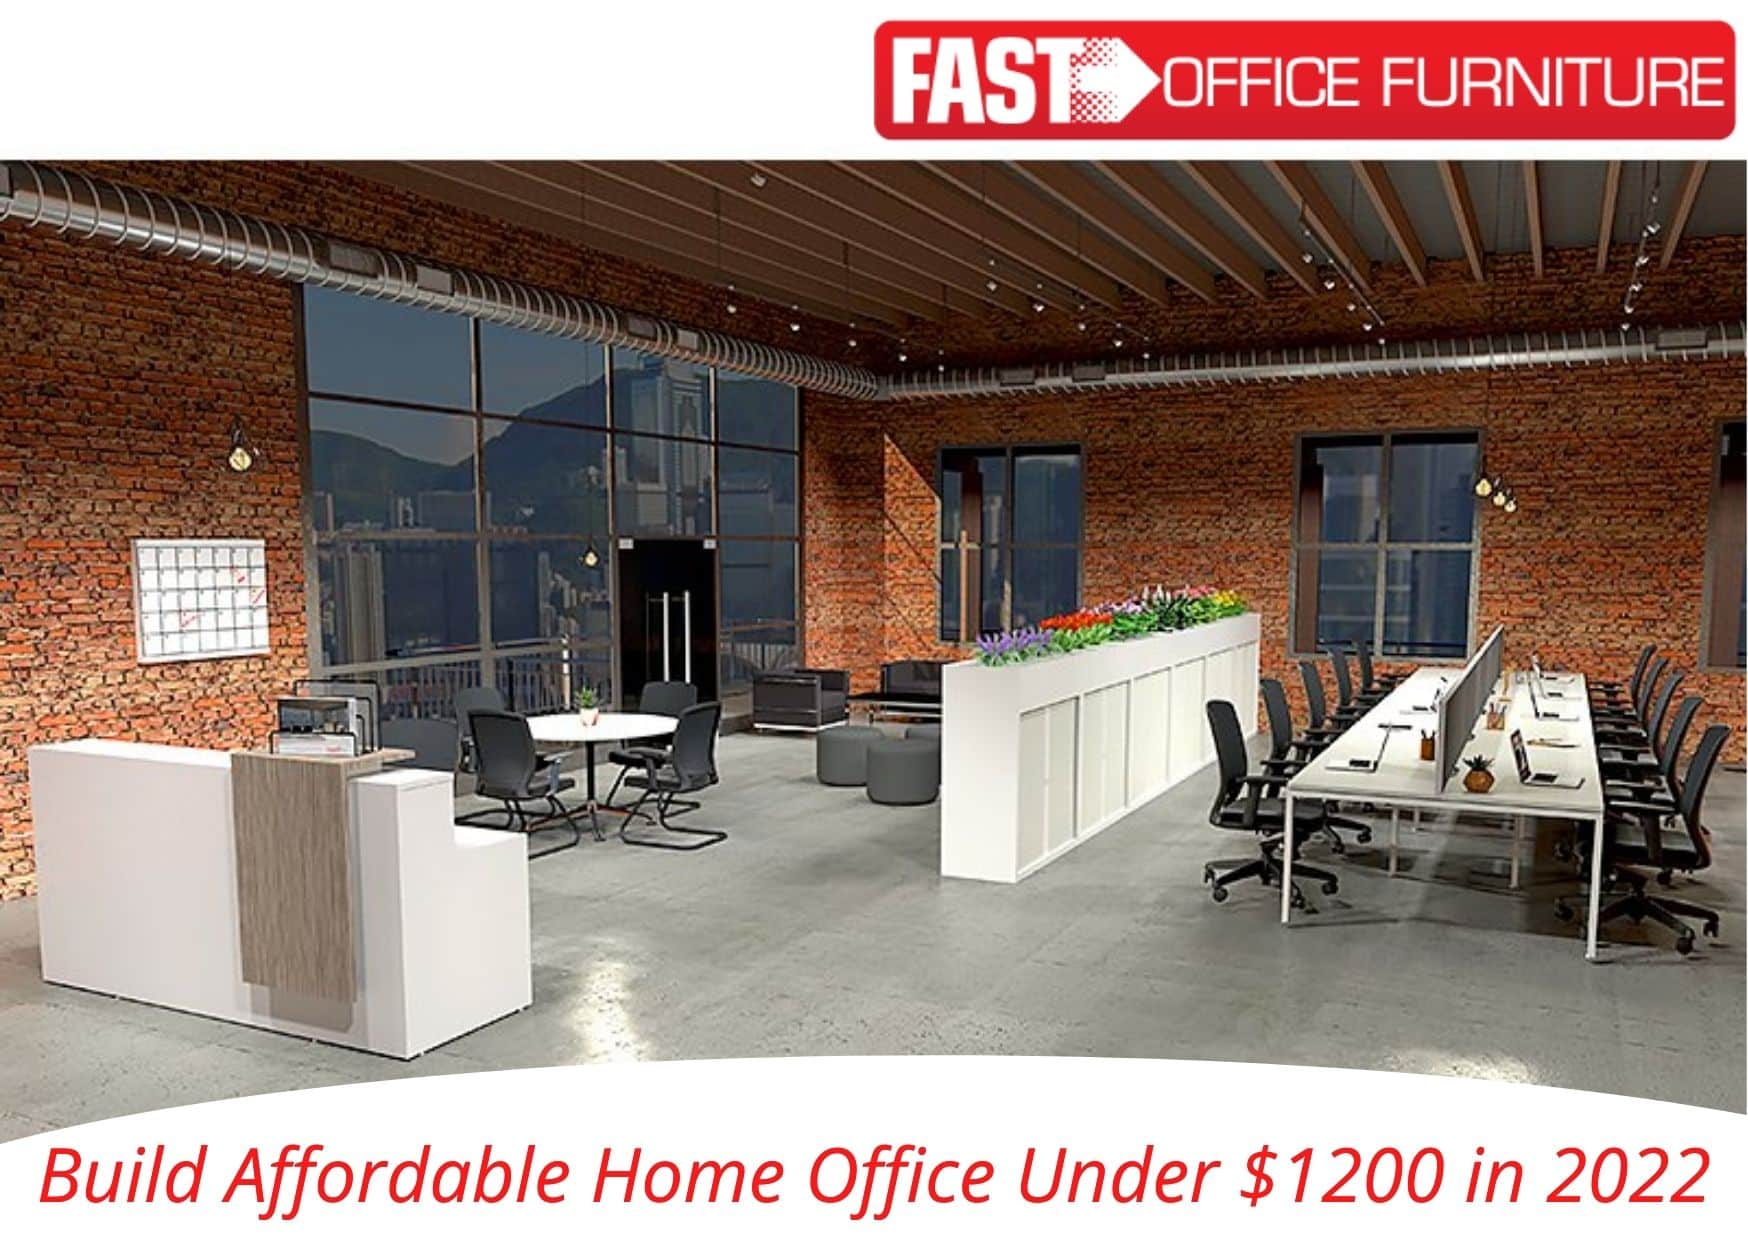 Build Affordable Home Office Under $1200 in 2022